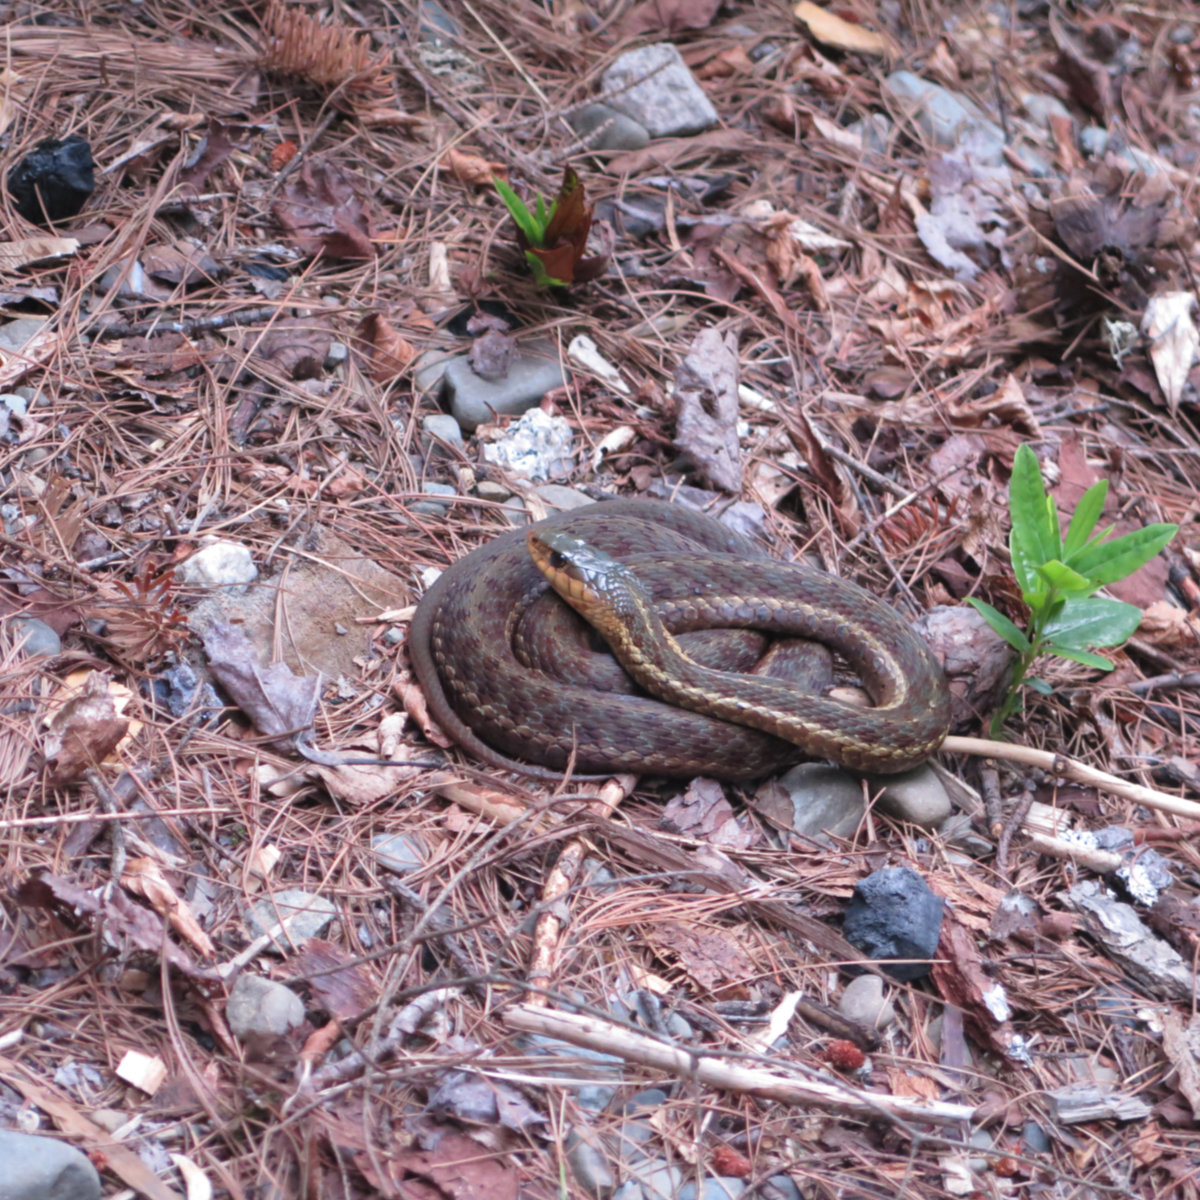 Common garter snake. Having a quiet moment near our cabin.